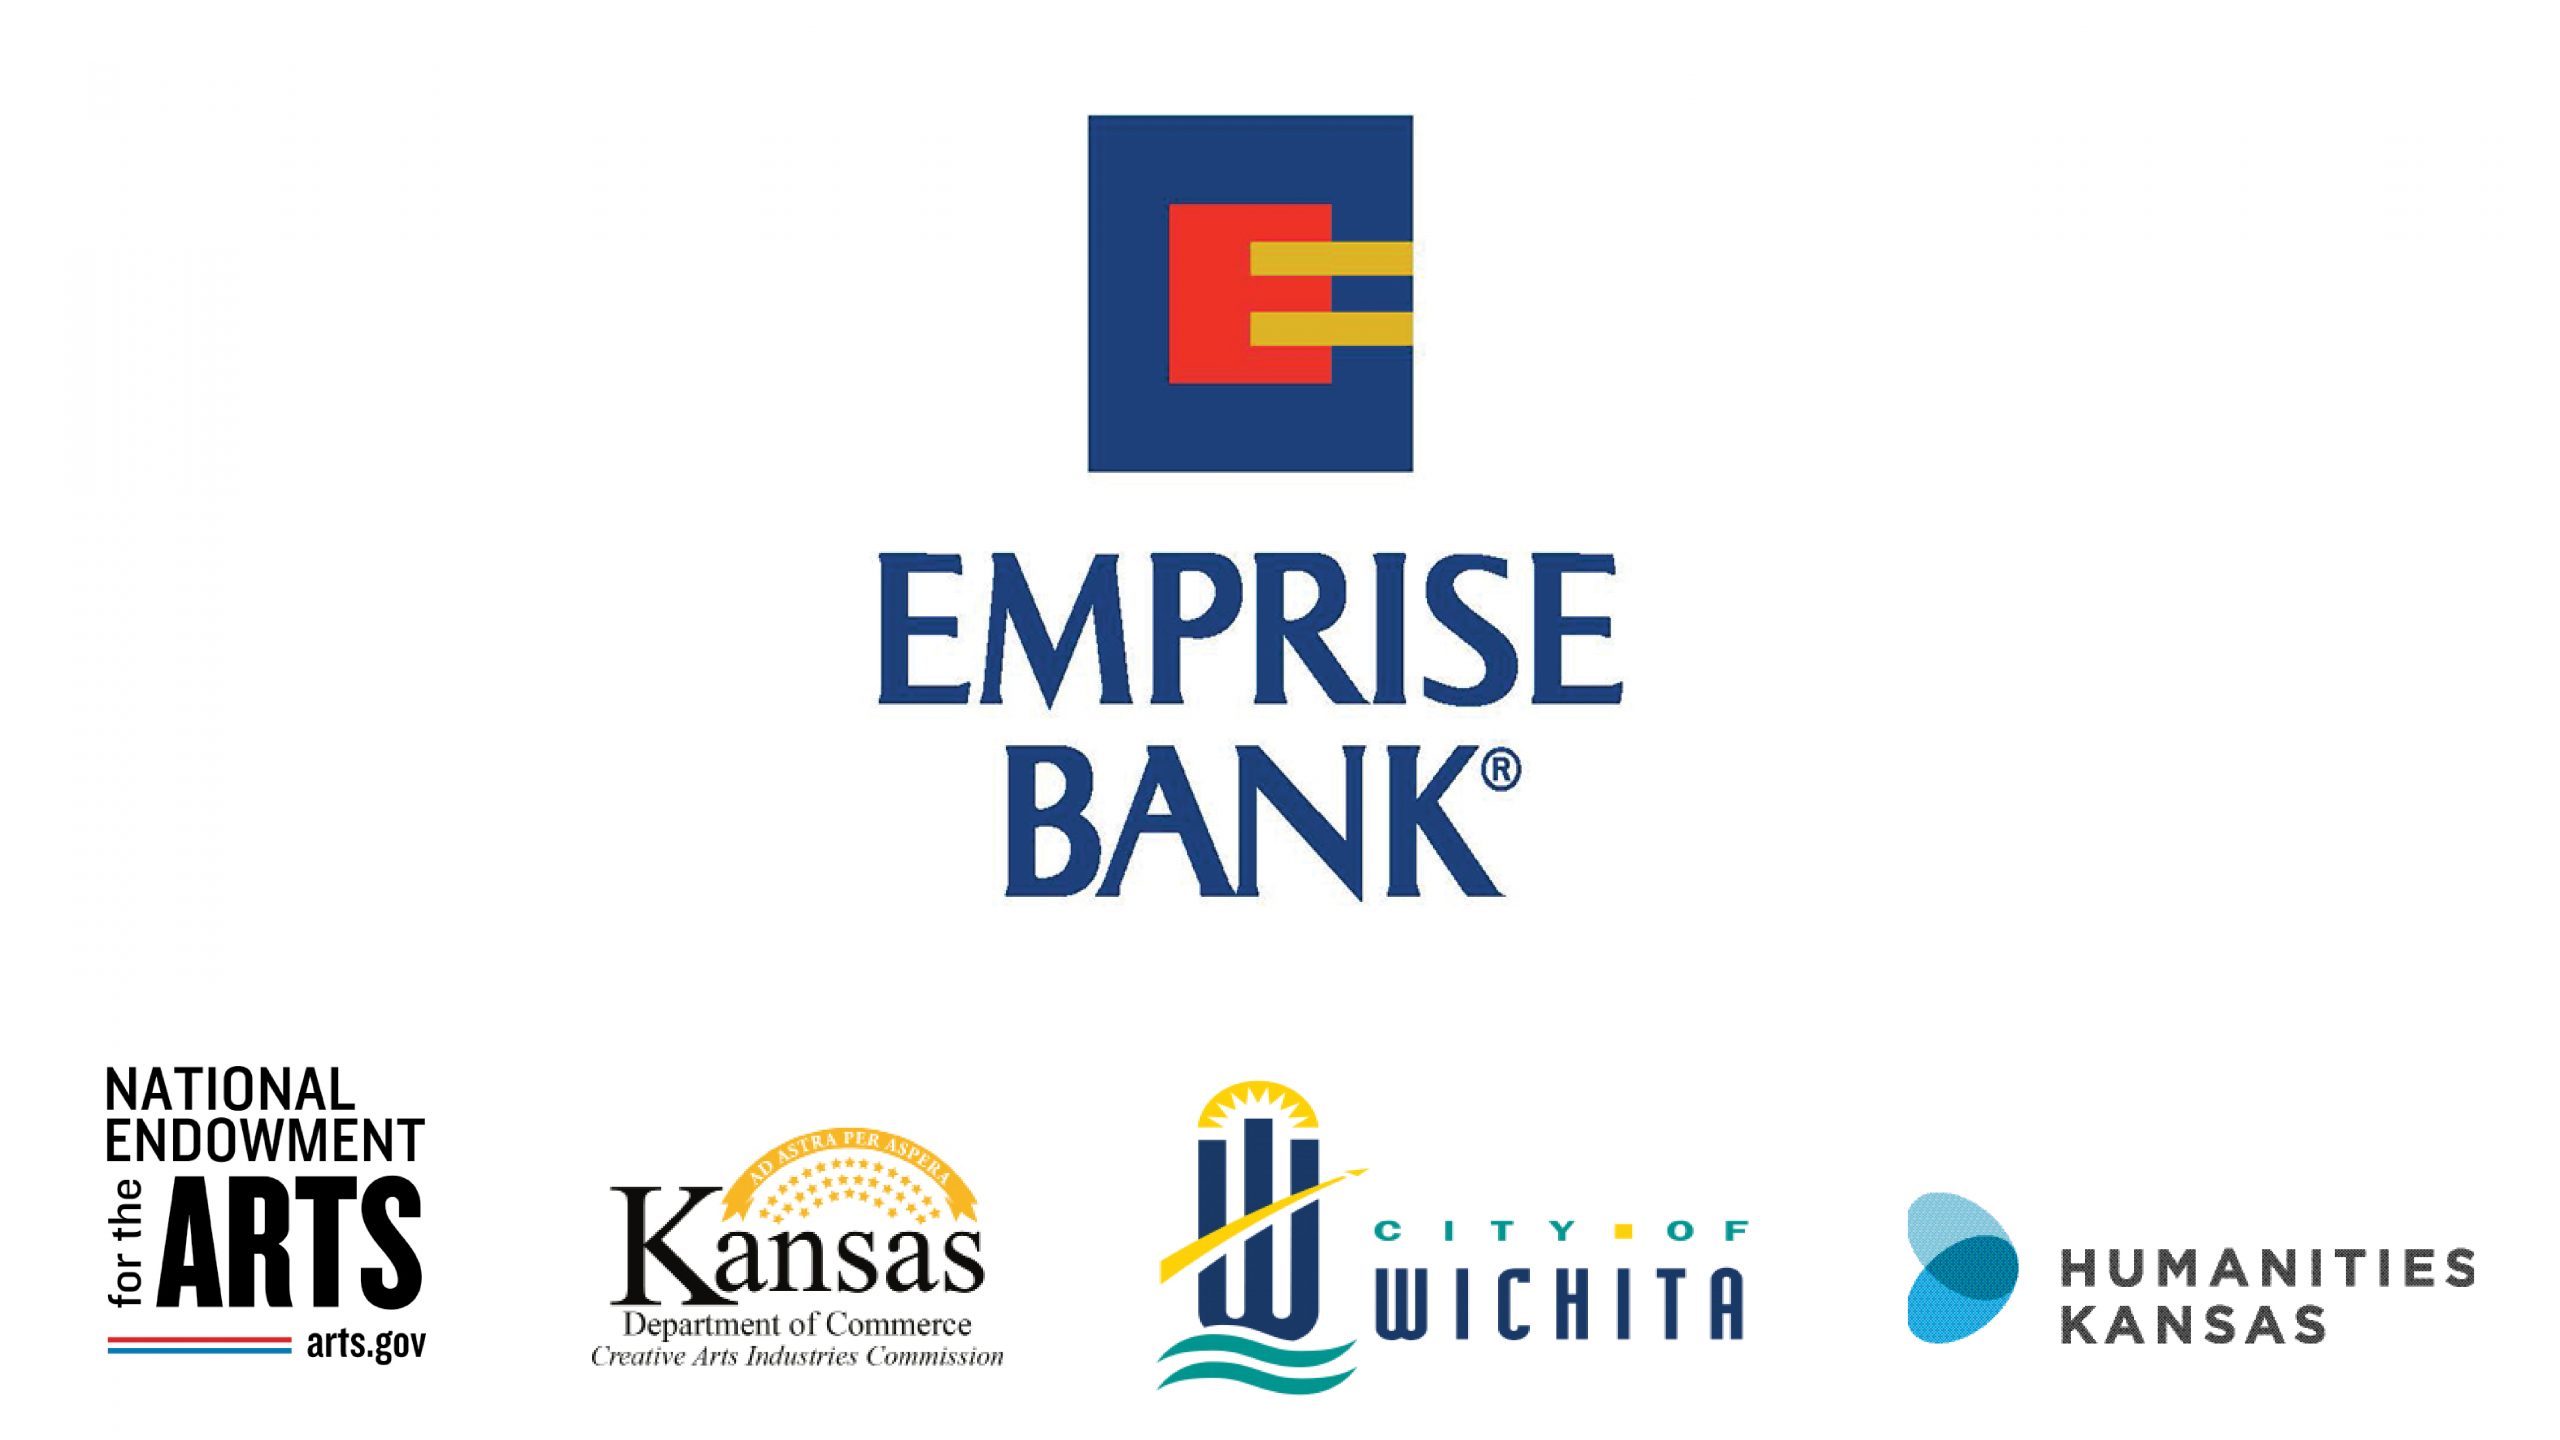 Sponsors: Emprise bank, the National Endowment of the Arts, The Kansas Department of Commerce Create Arts Industries Commission, the City of Wichita and Humanities Kansas